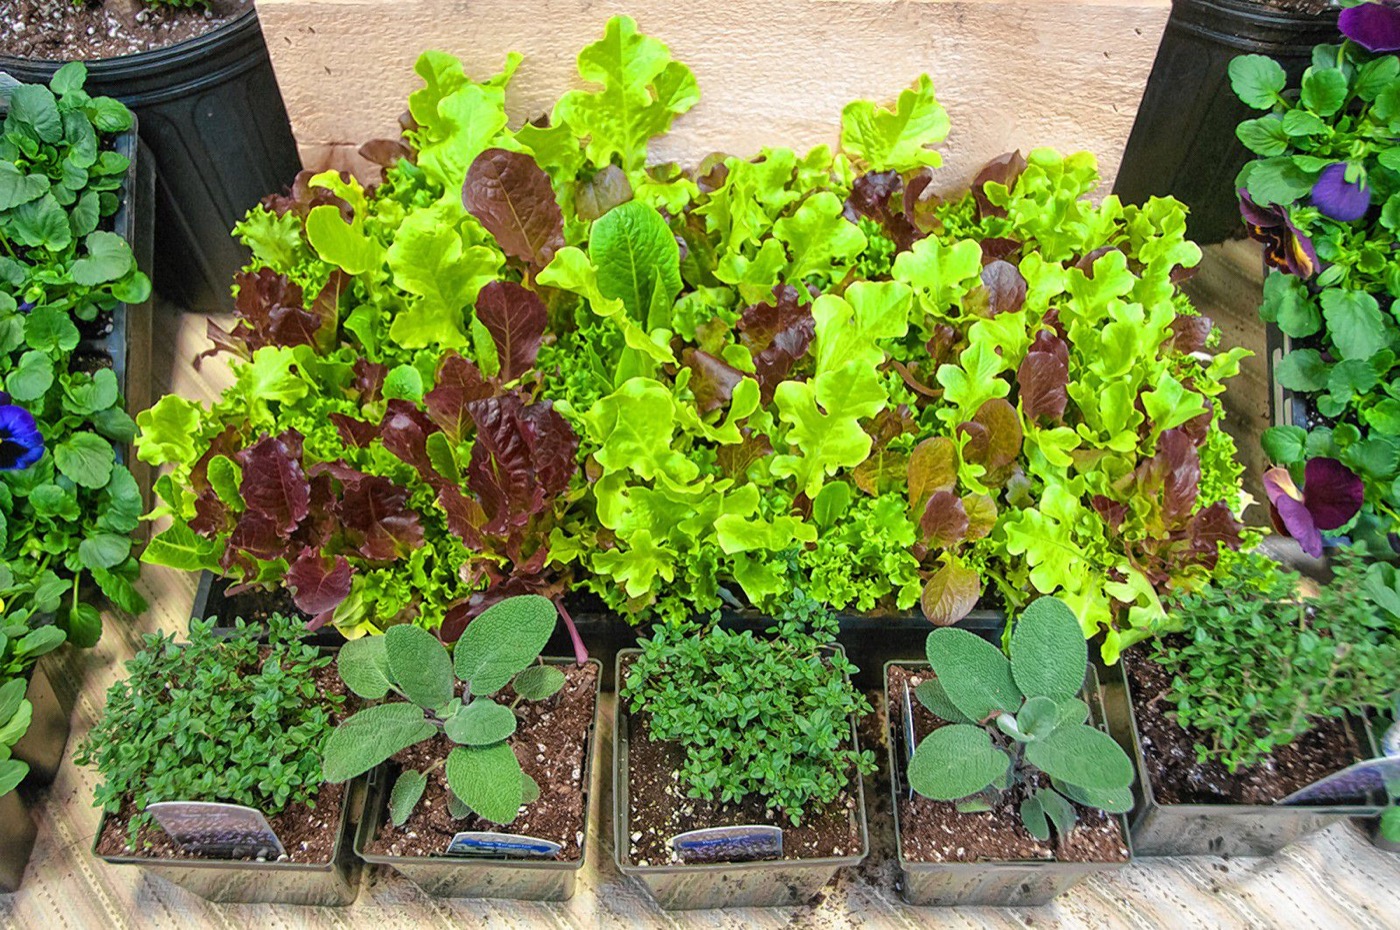 Herbs and lettuce at the Killdeer Farm display at Flavors of the Valley in 2015.  4-12-2015  Medora Hebert